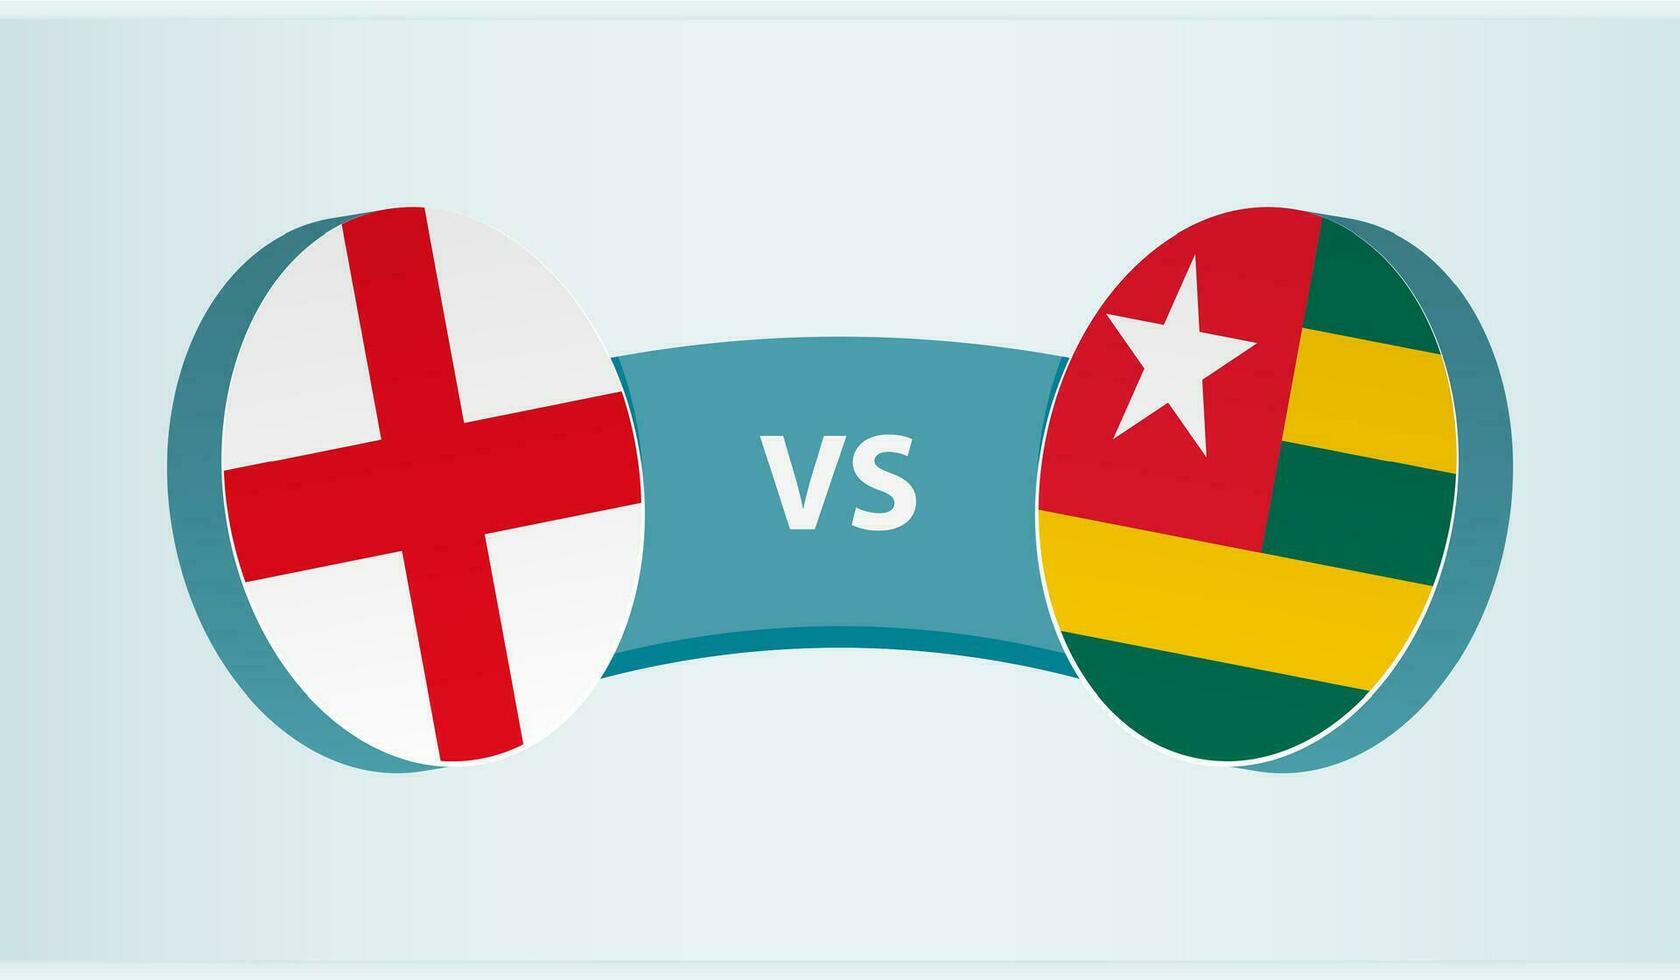 England versus Togo, team sports competition concept. vector